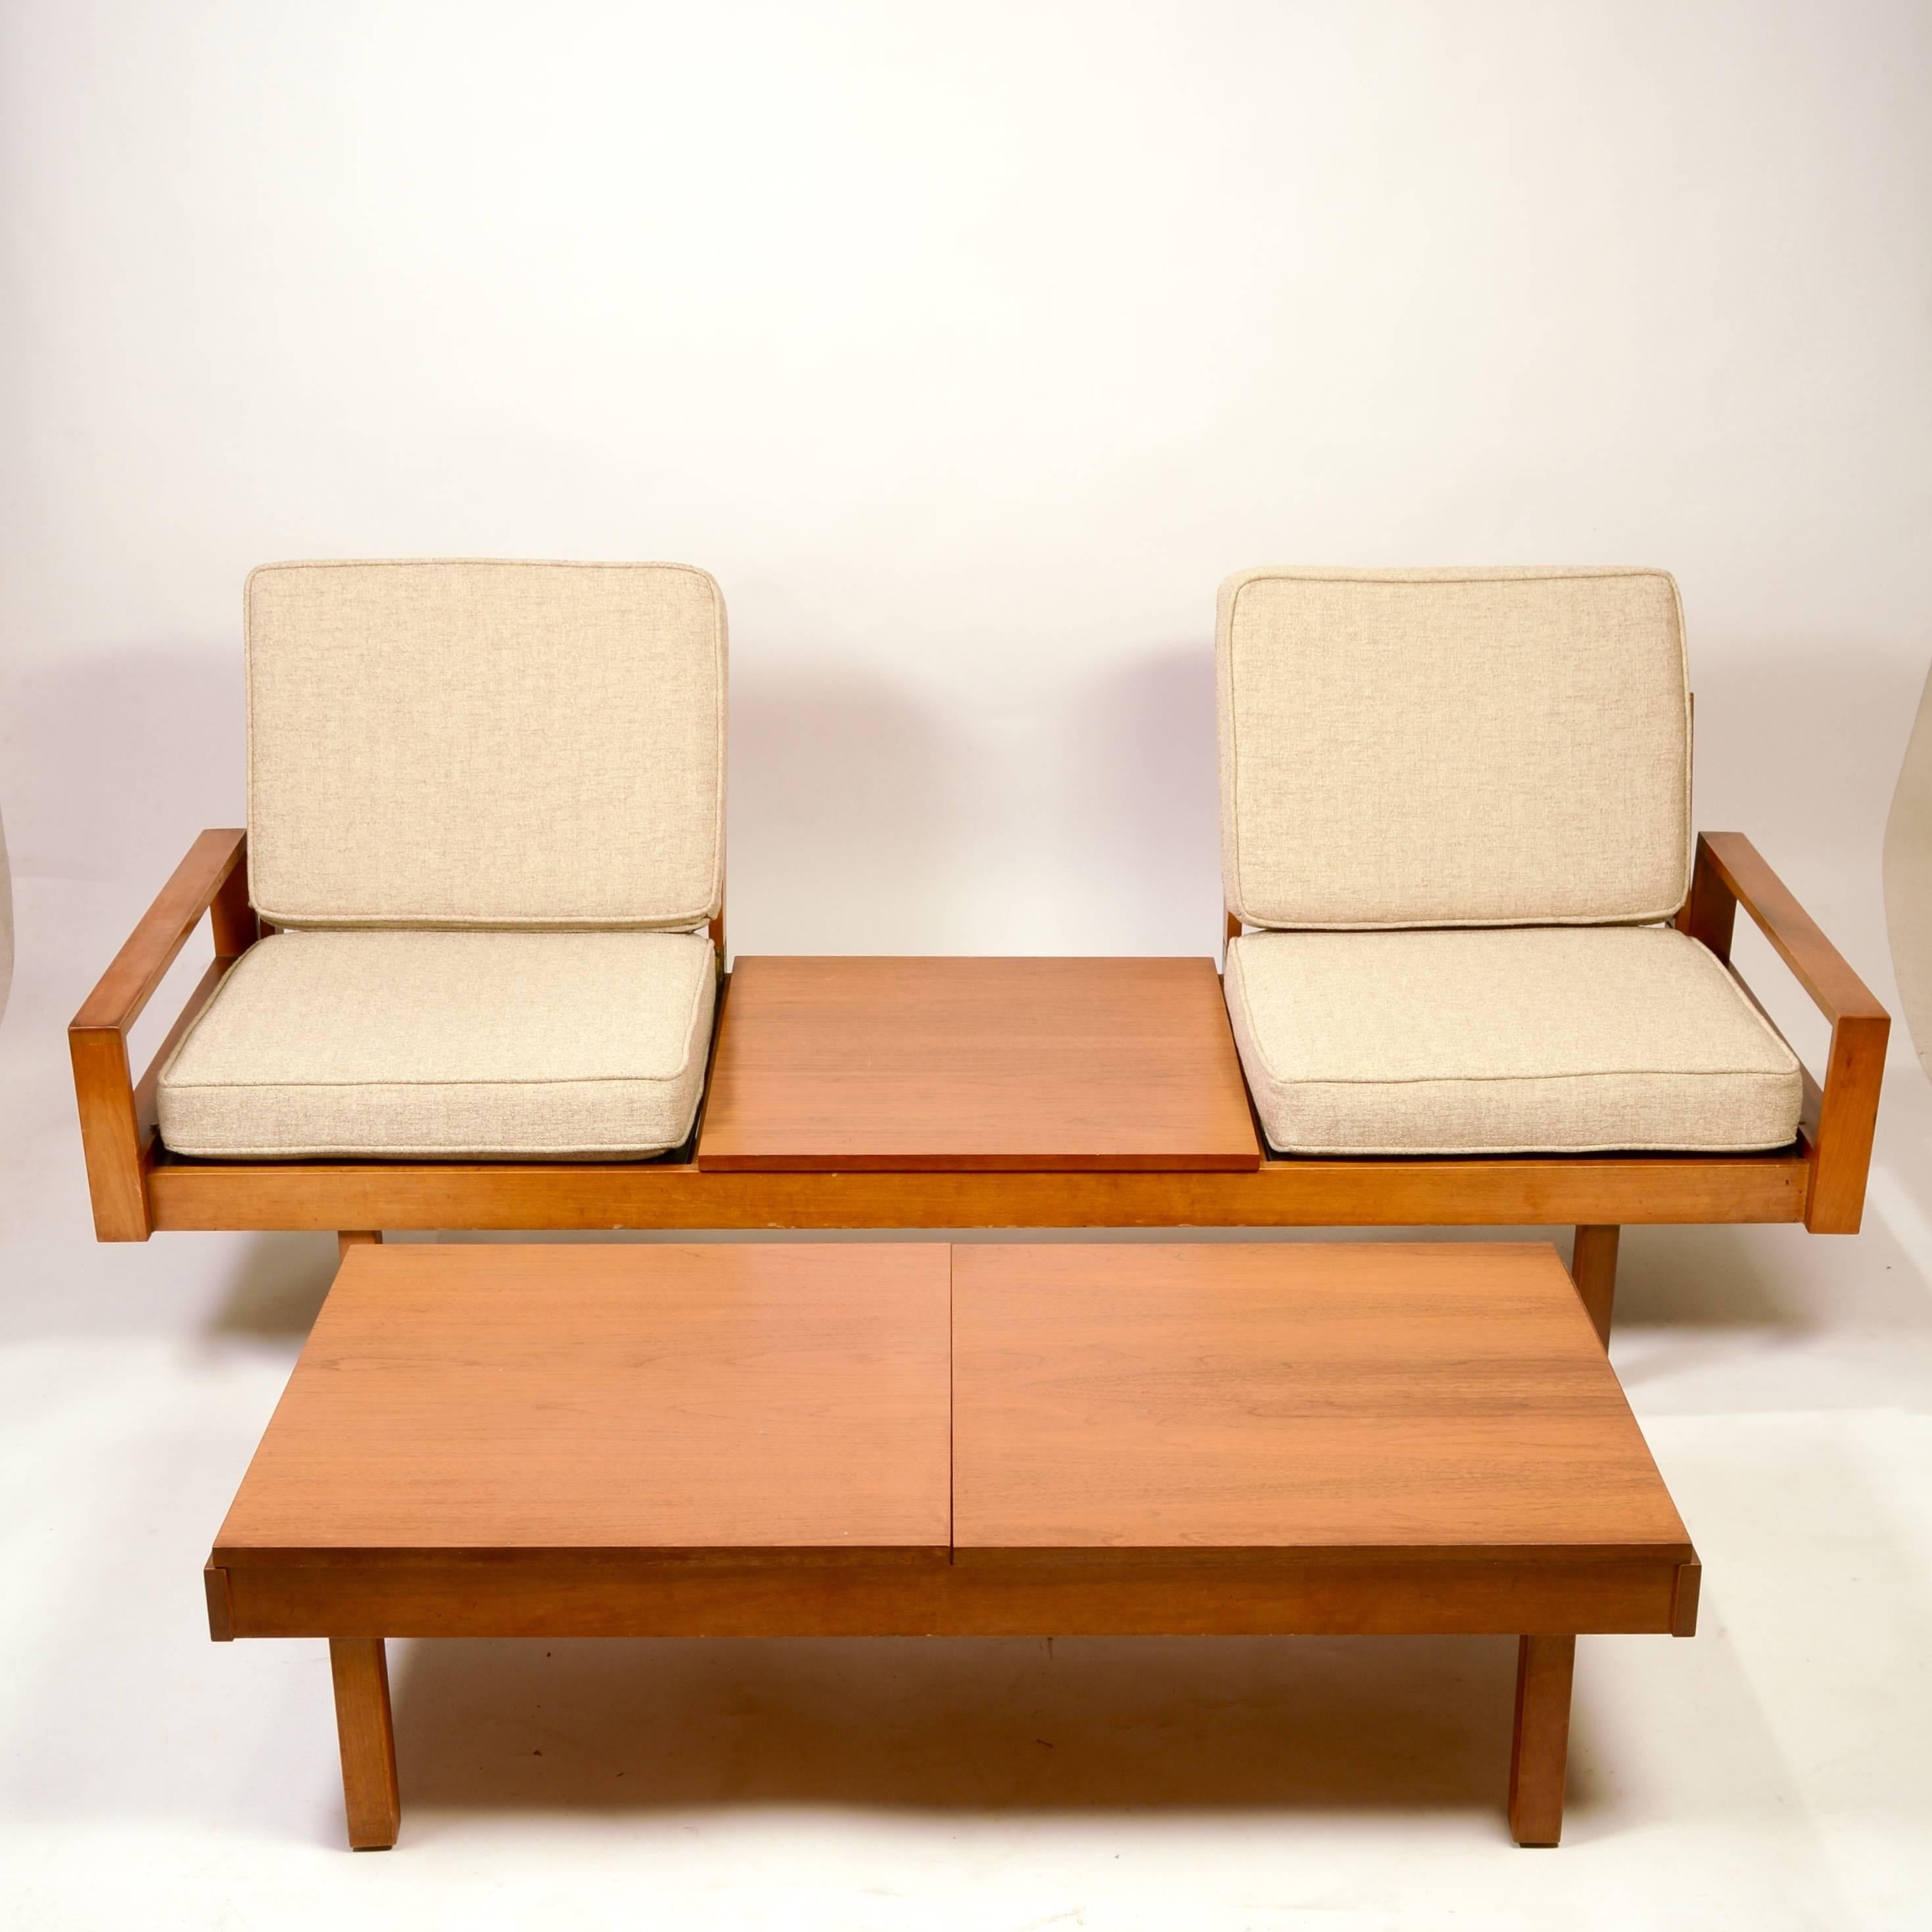 American Sofa by Martin Borenstein for the Brown & Saltman Modular Living Room System